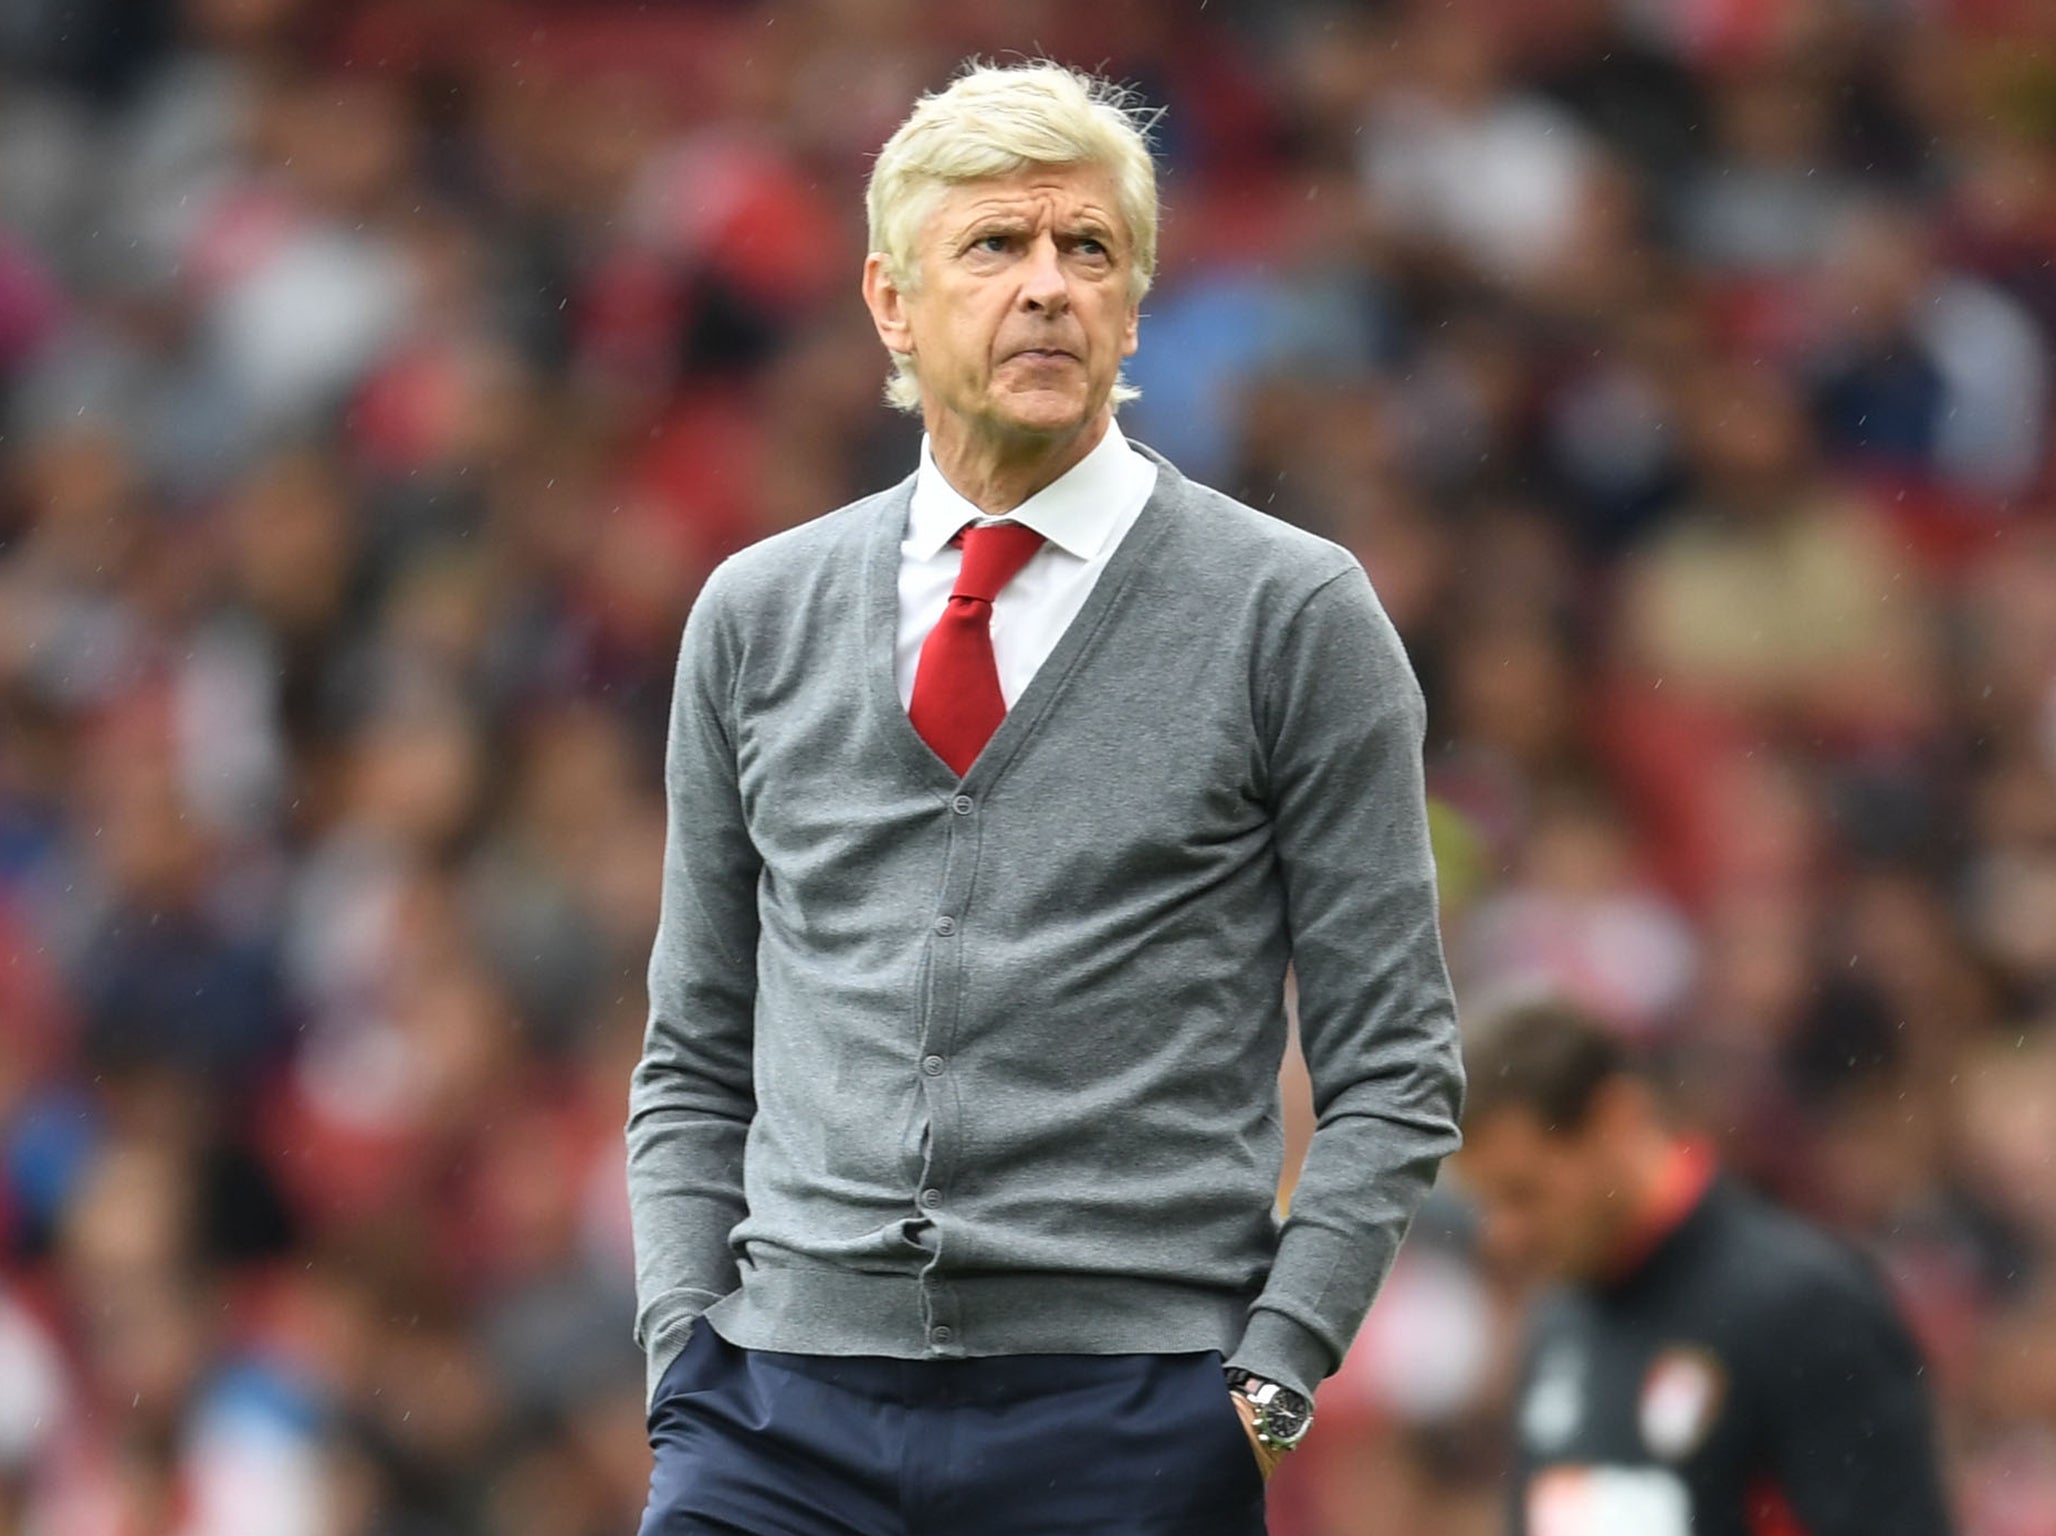 The Arsenal manager turned down the opportunity to join Manchester United